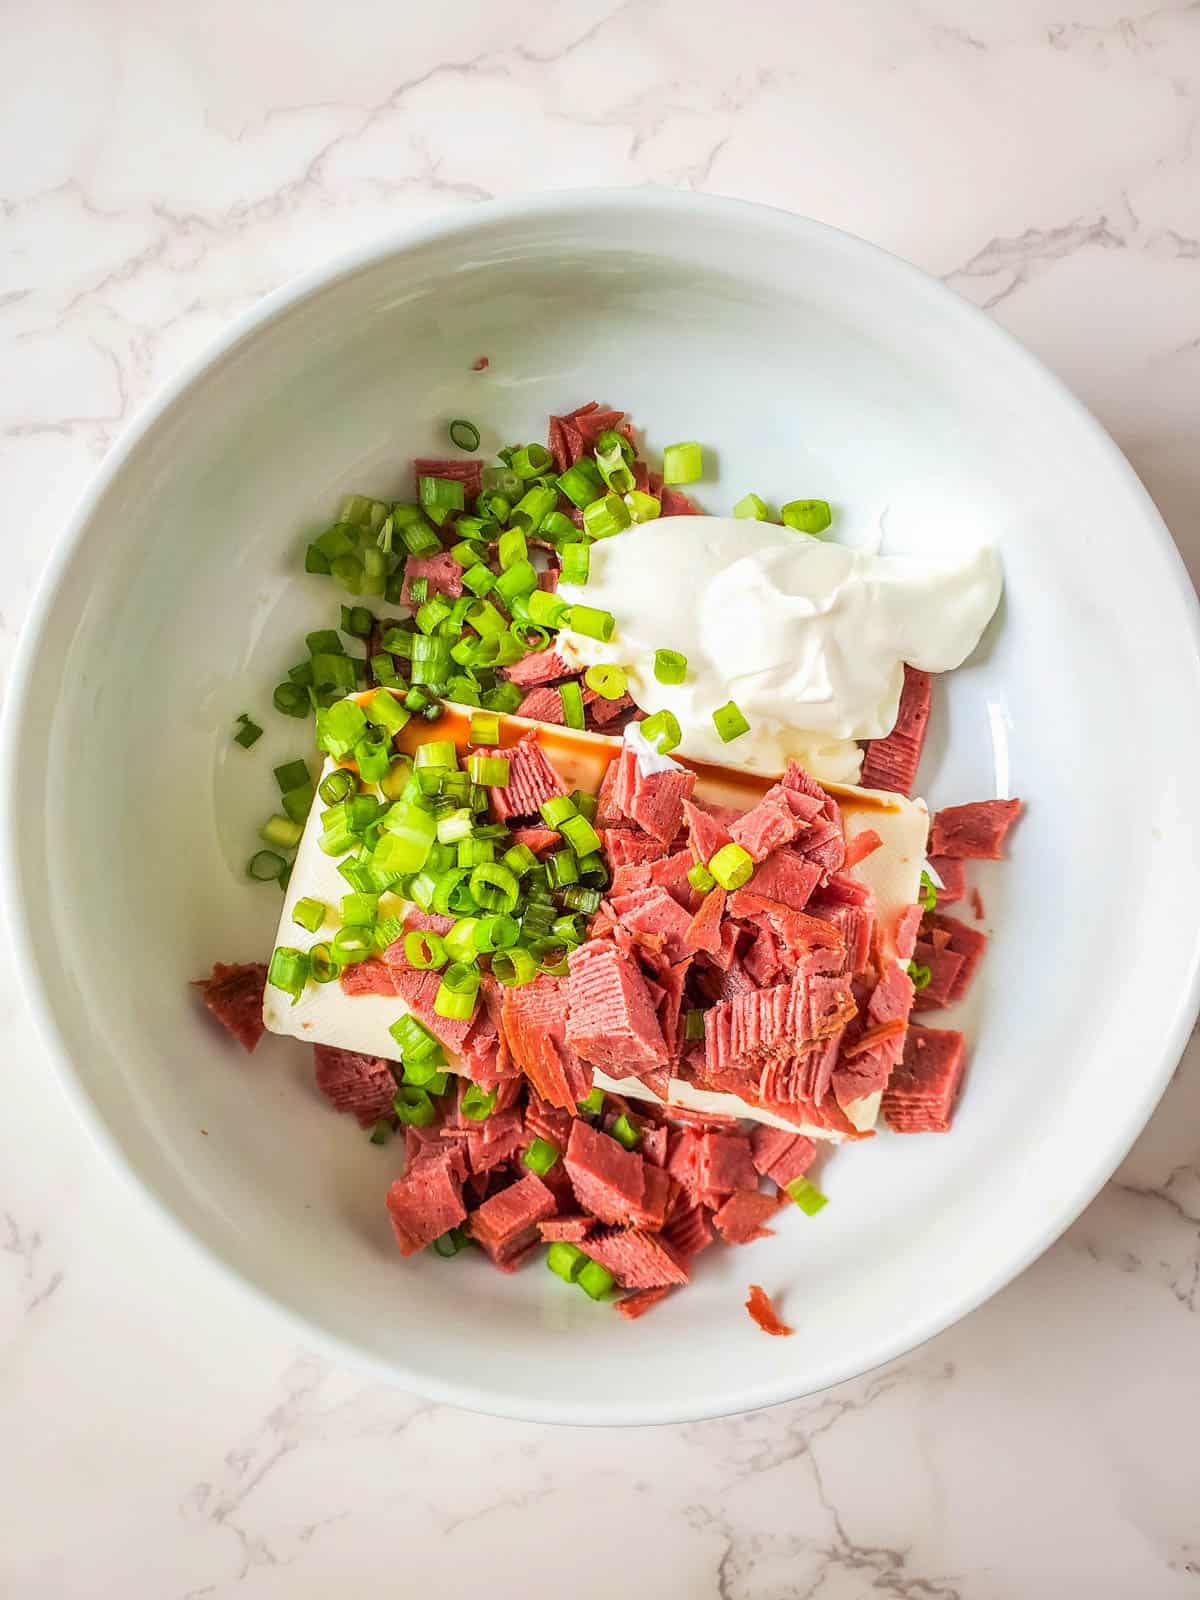 Small pieces of dried beef, a block of softened cream cheese, green onions, and soy sauce altogether in a large bowl.